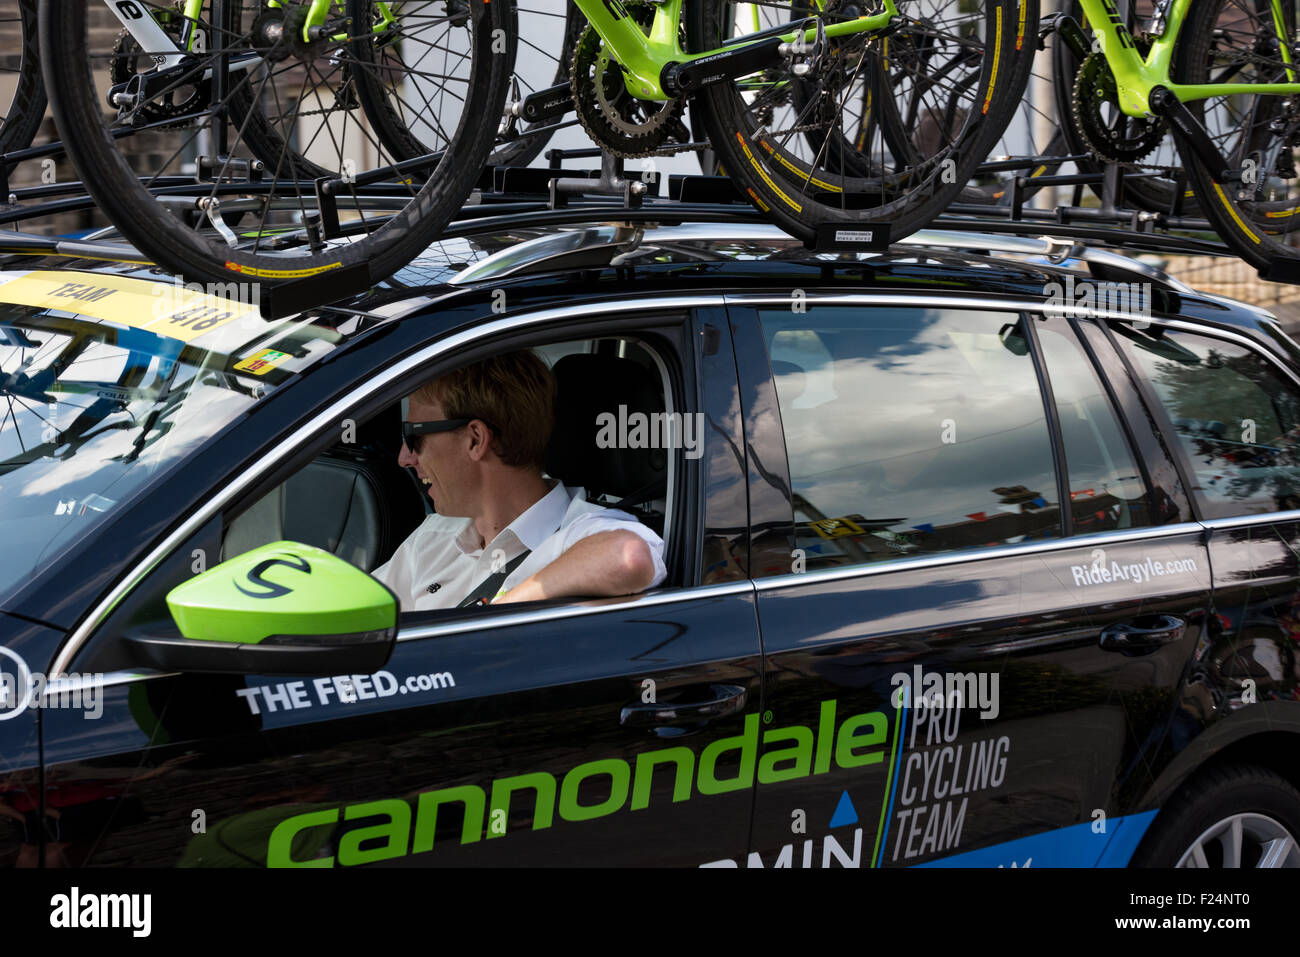 The Cannondale Garmin pro cycling team support car at the Tour of Britain 2015 Stage 6 Matlock Derbyshire UK Stock Photo